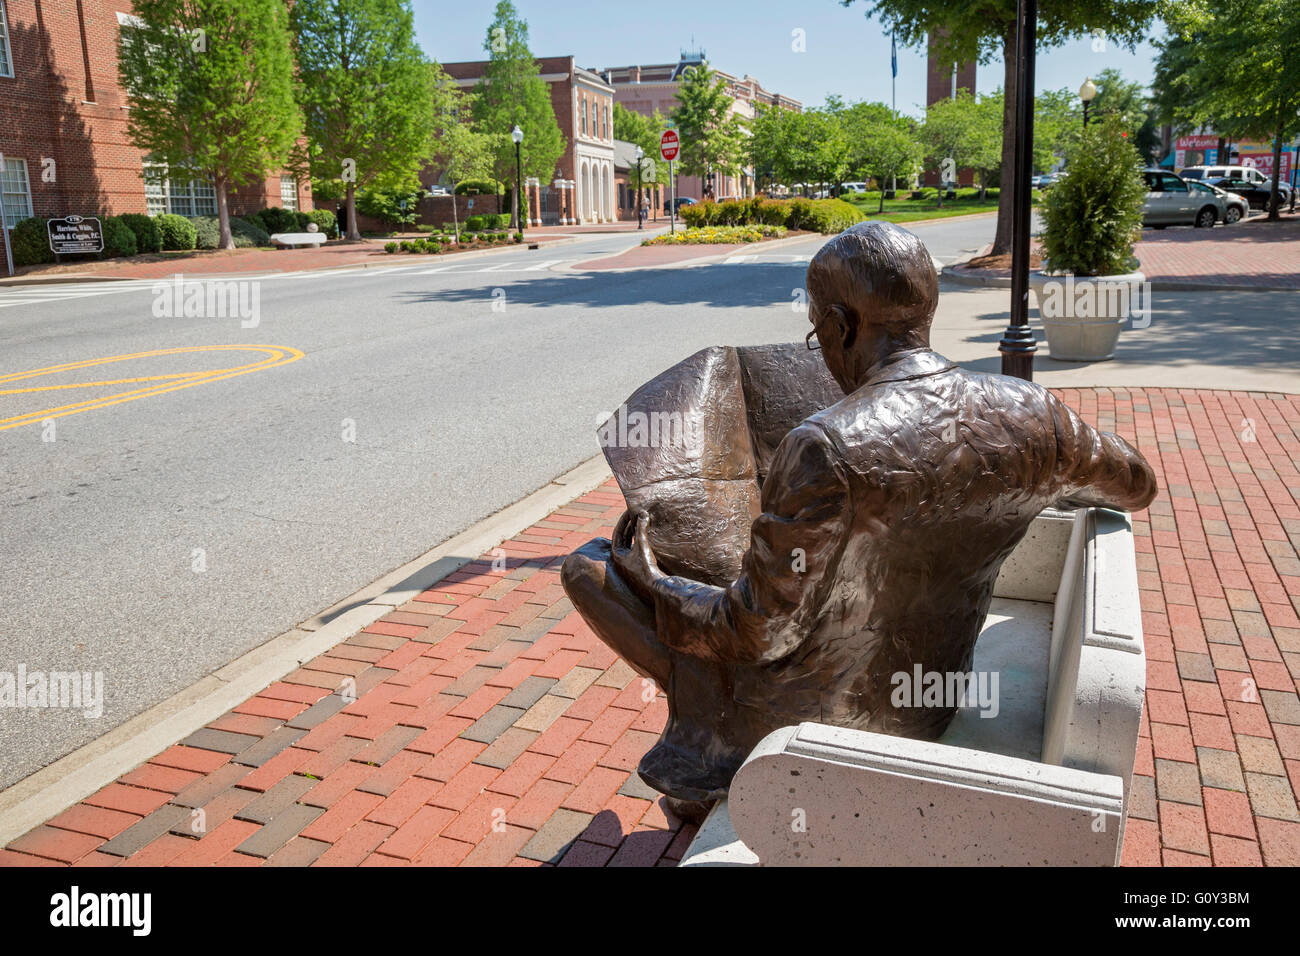 Spartanburg, South Carolina - A sculpture of a man sitting on a bench reading a newspaper outside the Spartanburg Herald-Journal Stock Photo